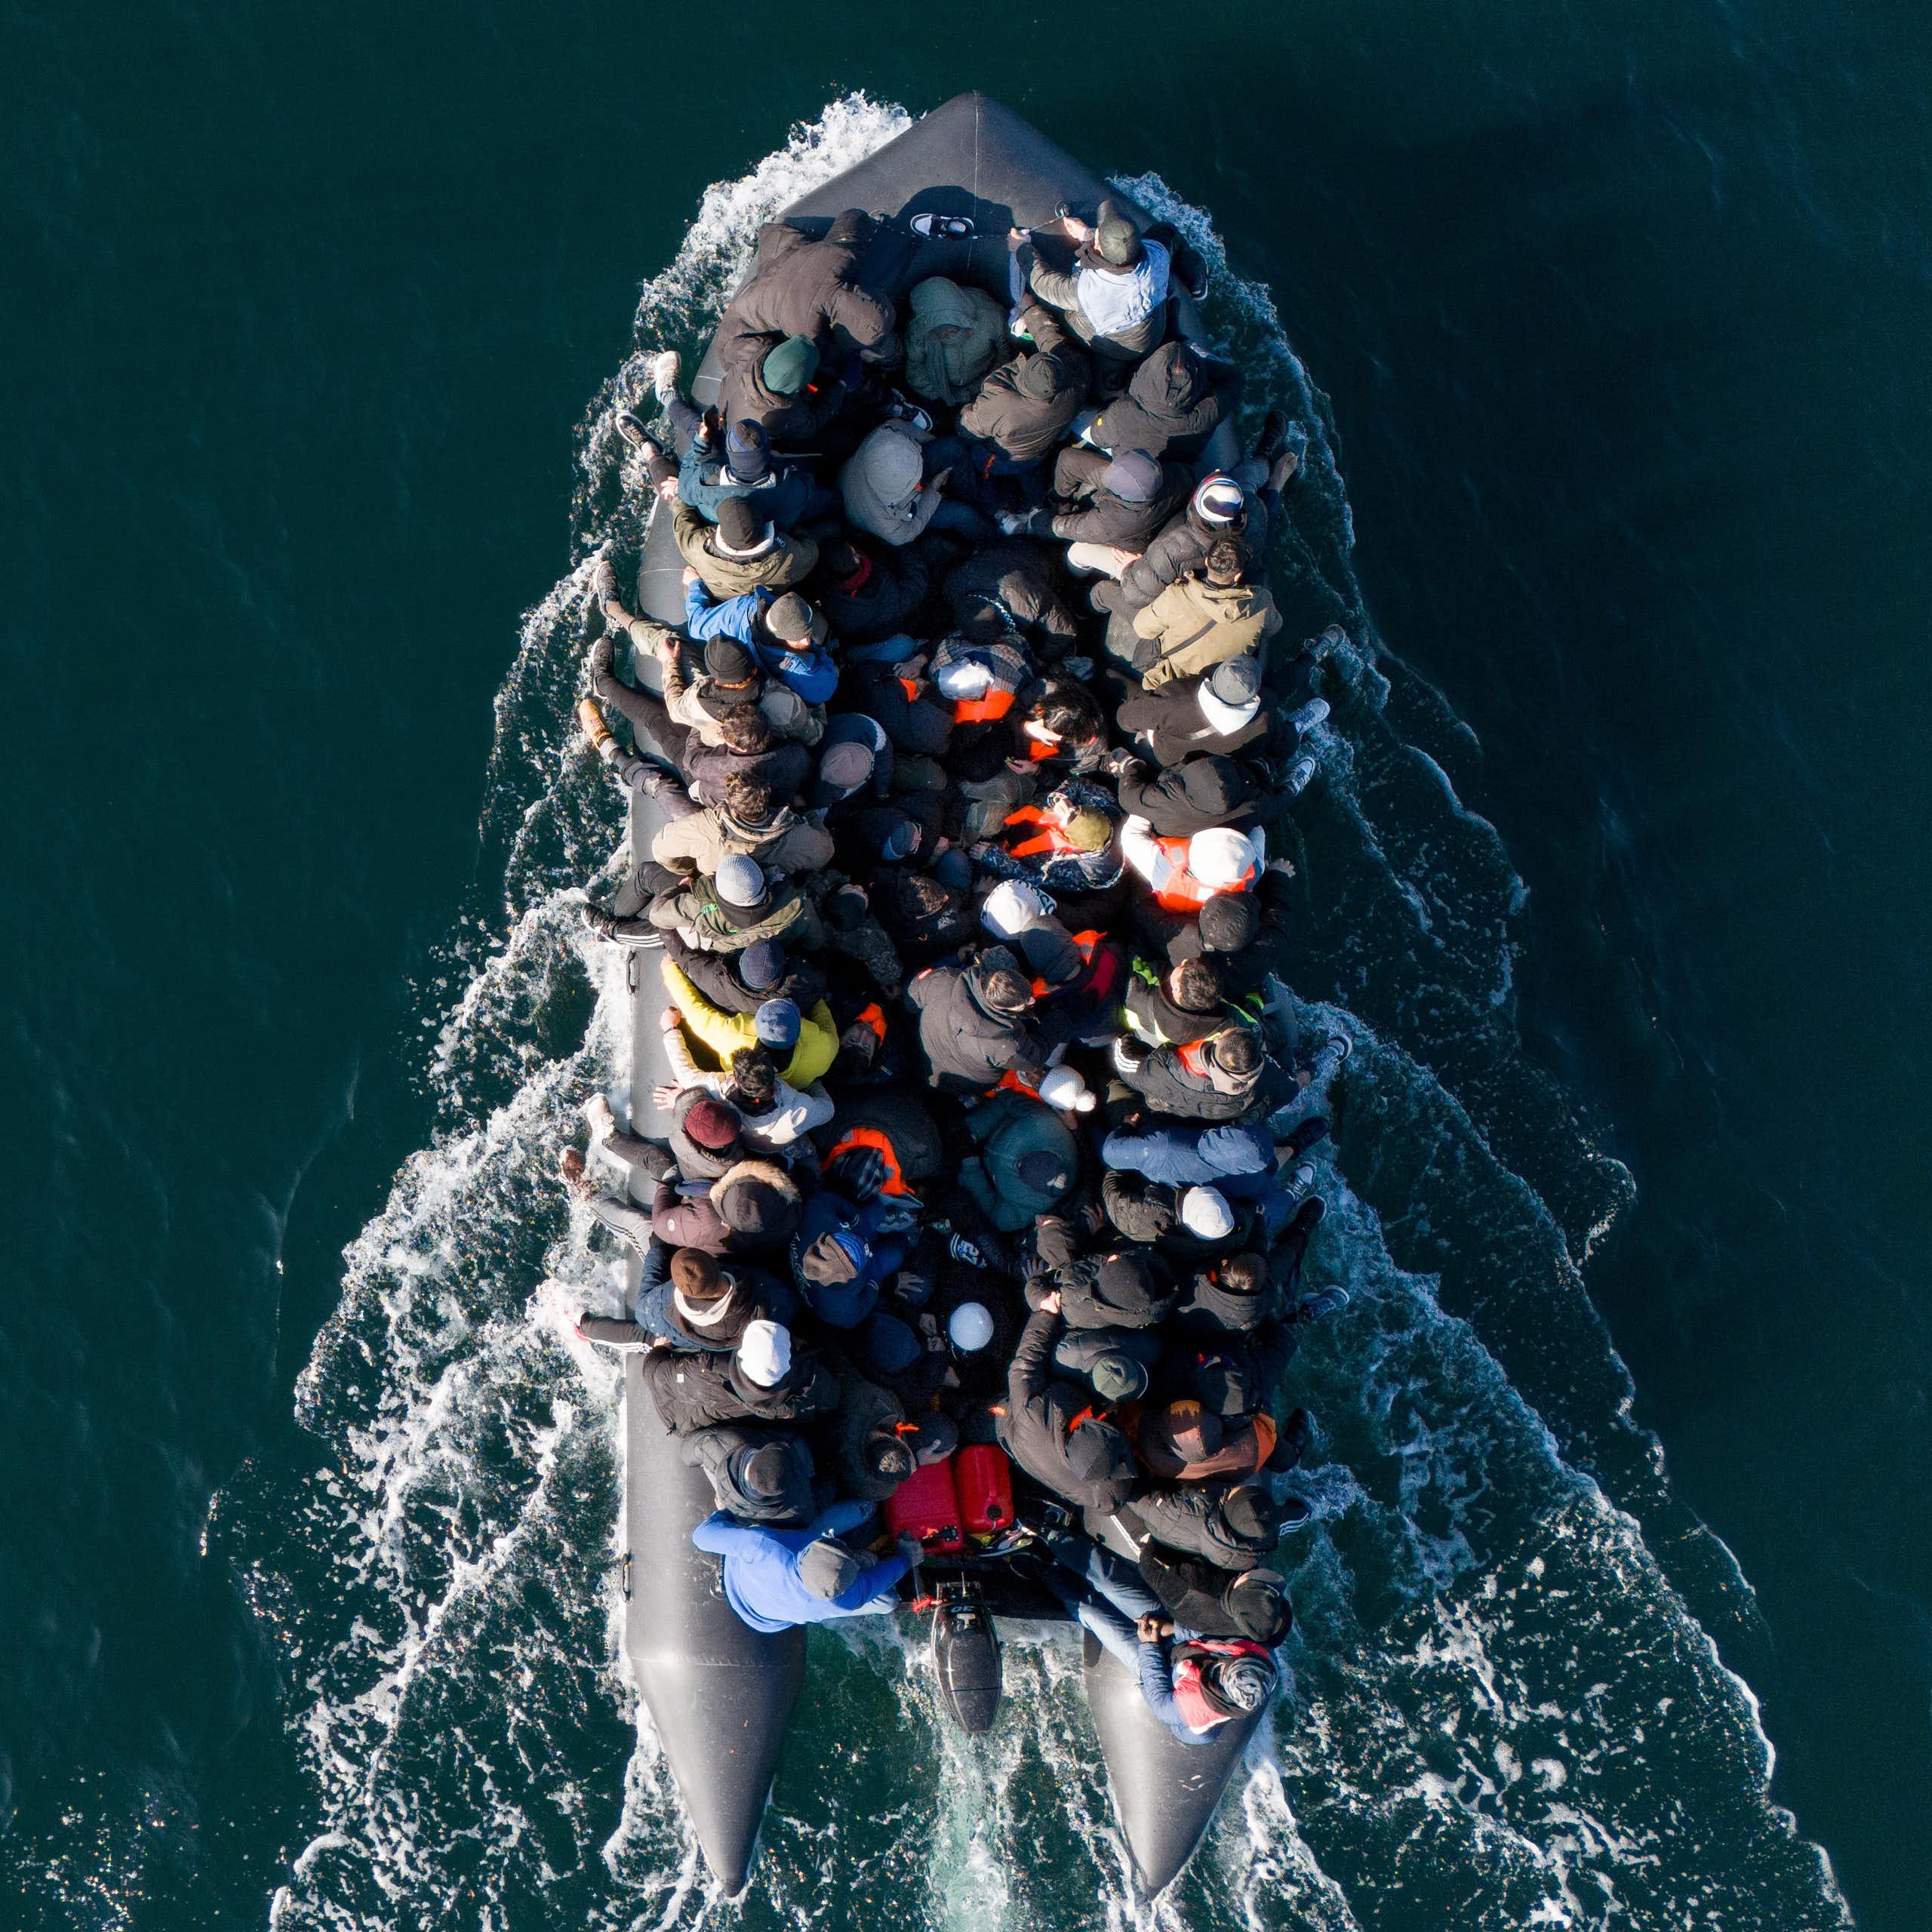 View from directly above of a small boat filled with people, surrounded by deep blue water